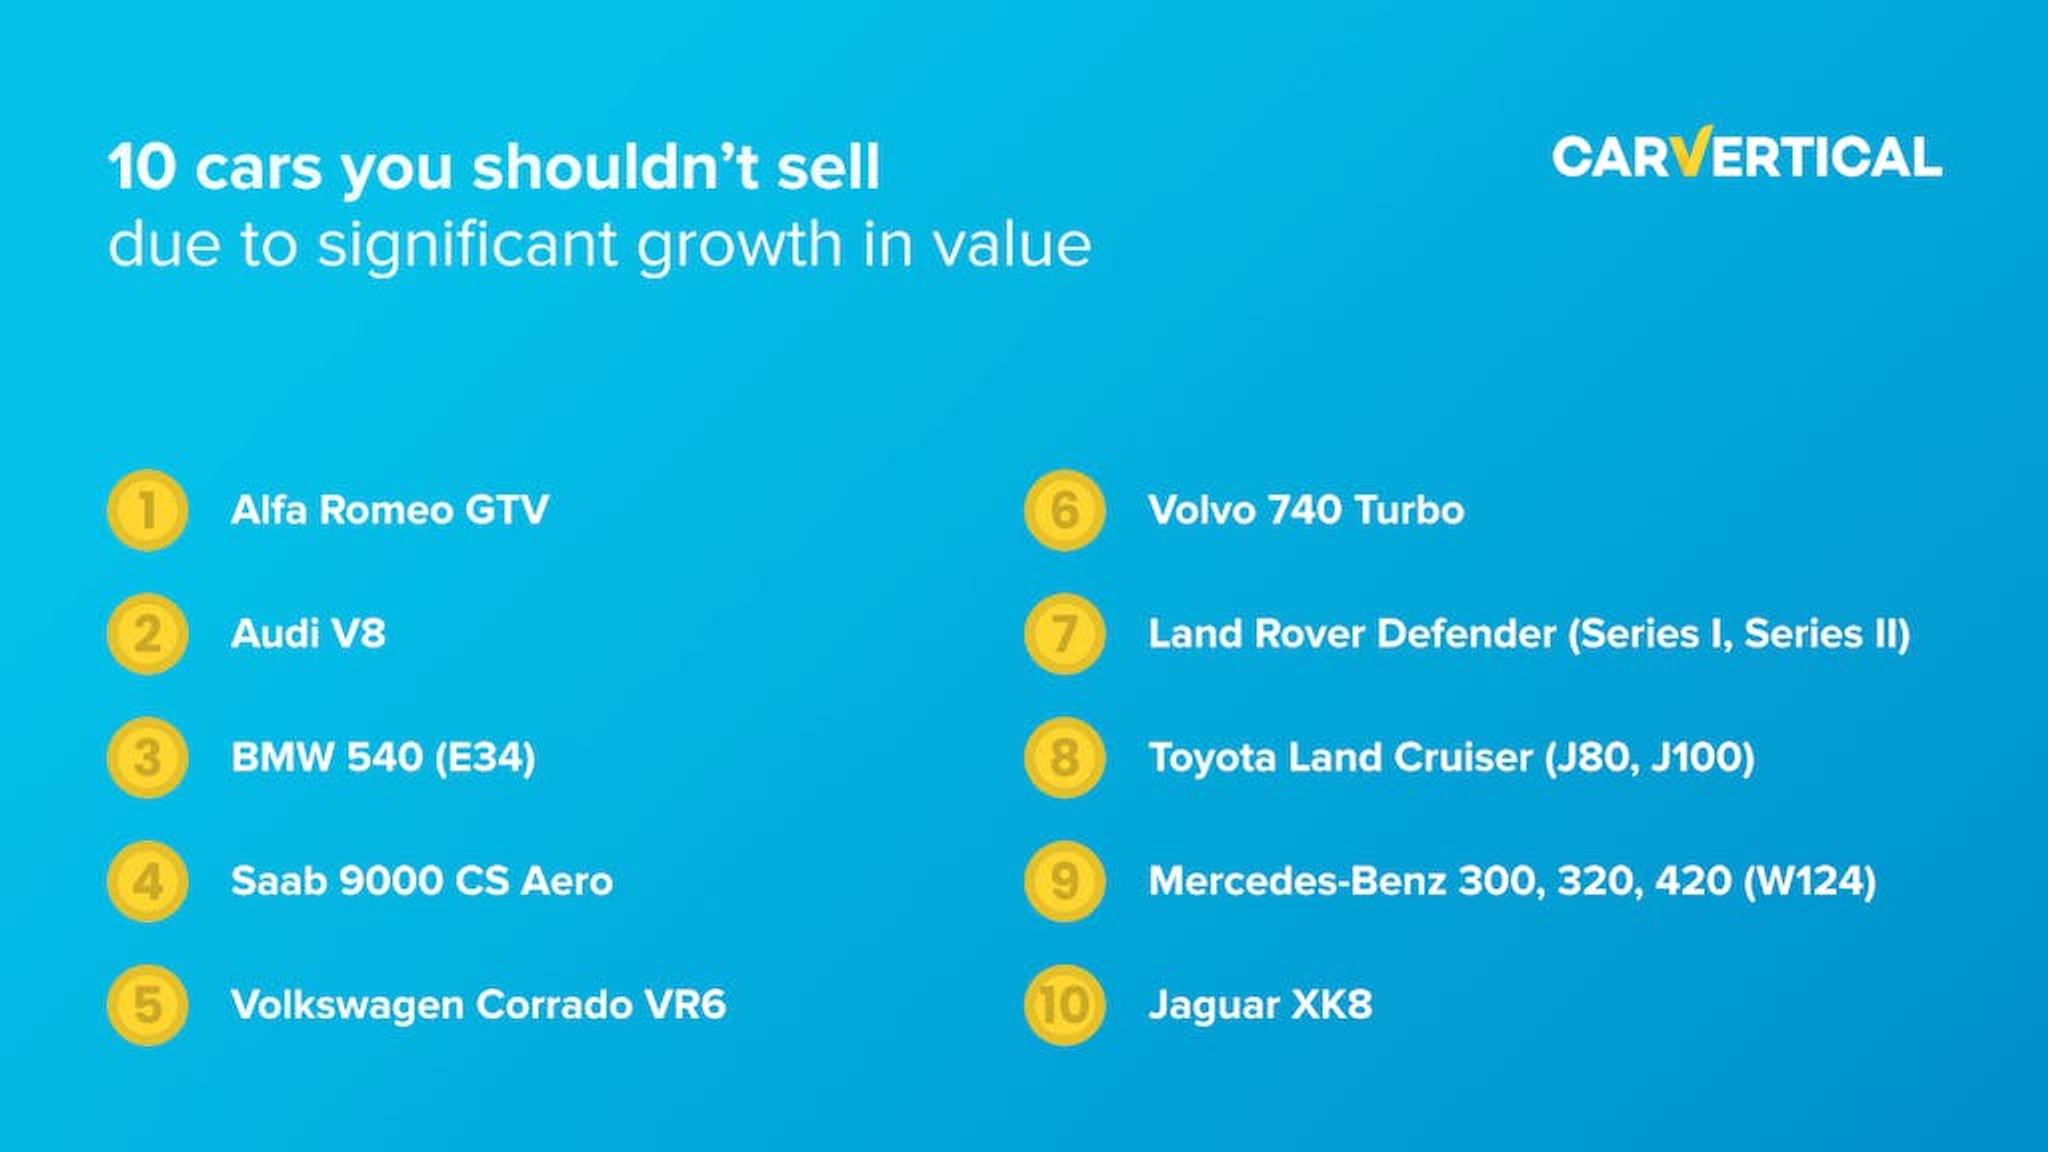 10 cars you shouldn’t sell due to significant growth in value